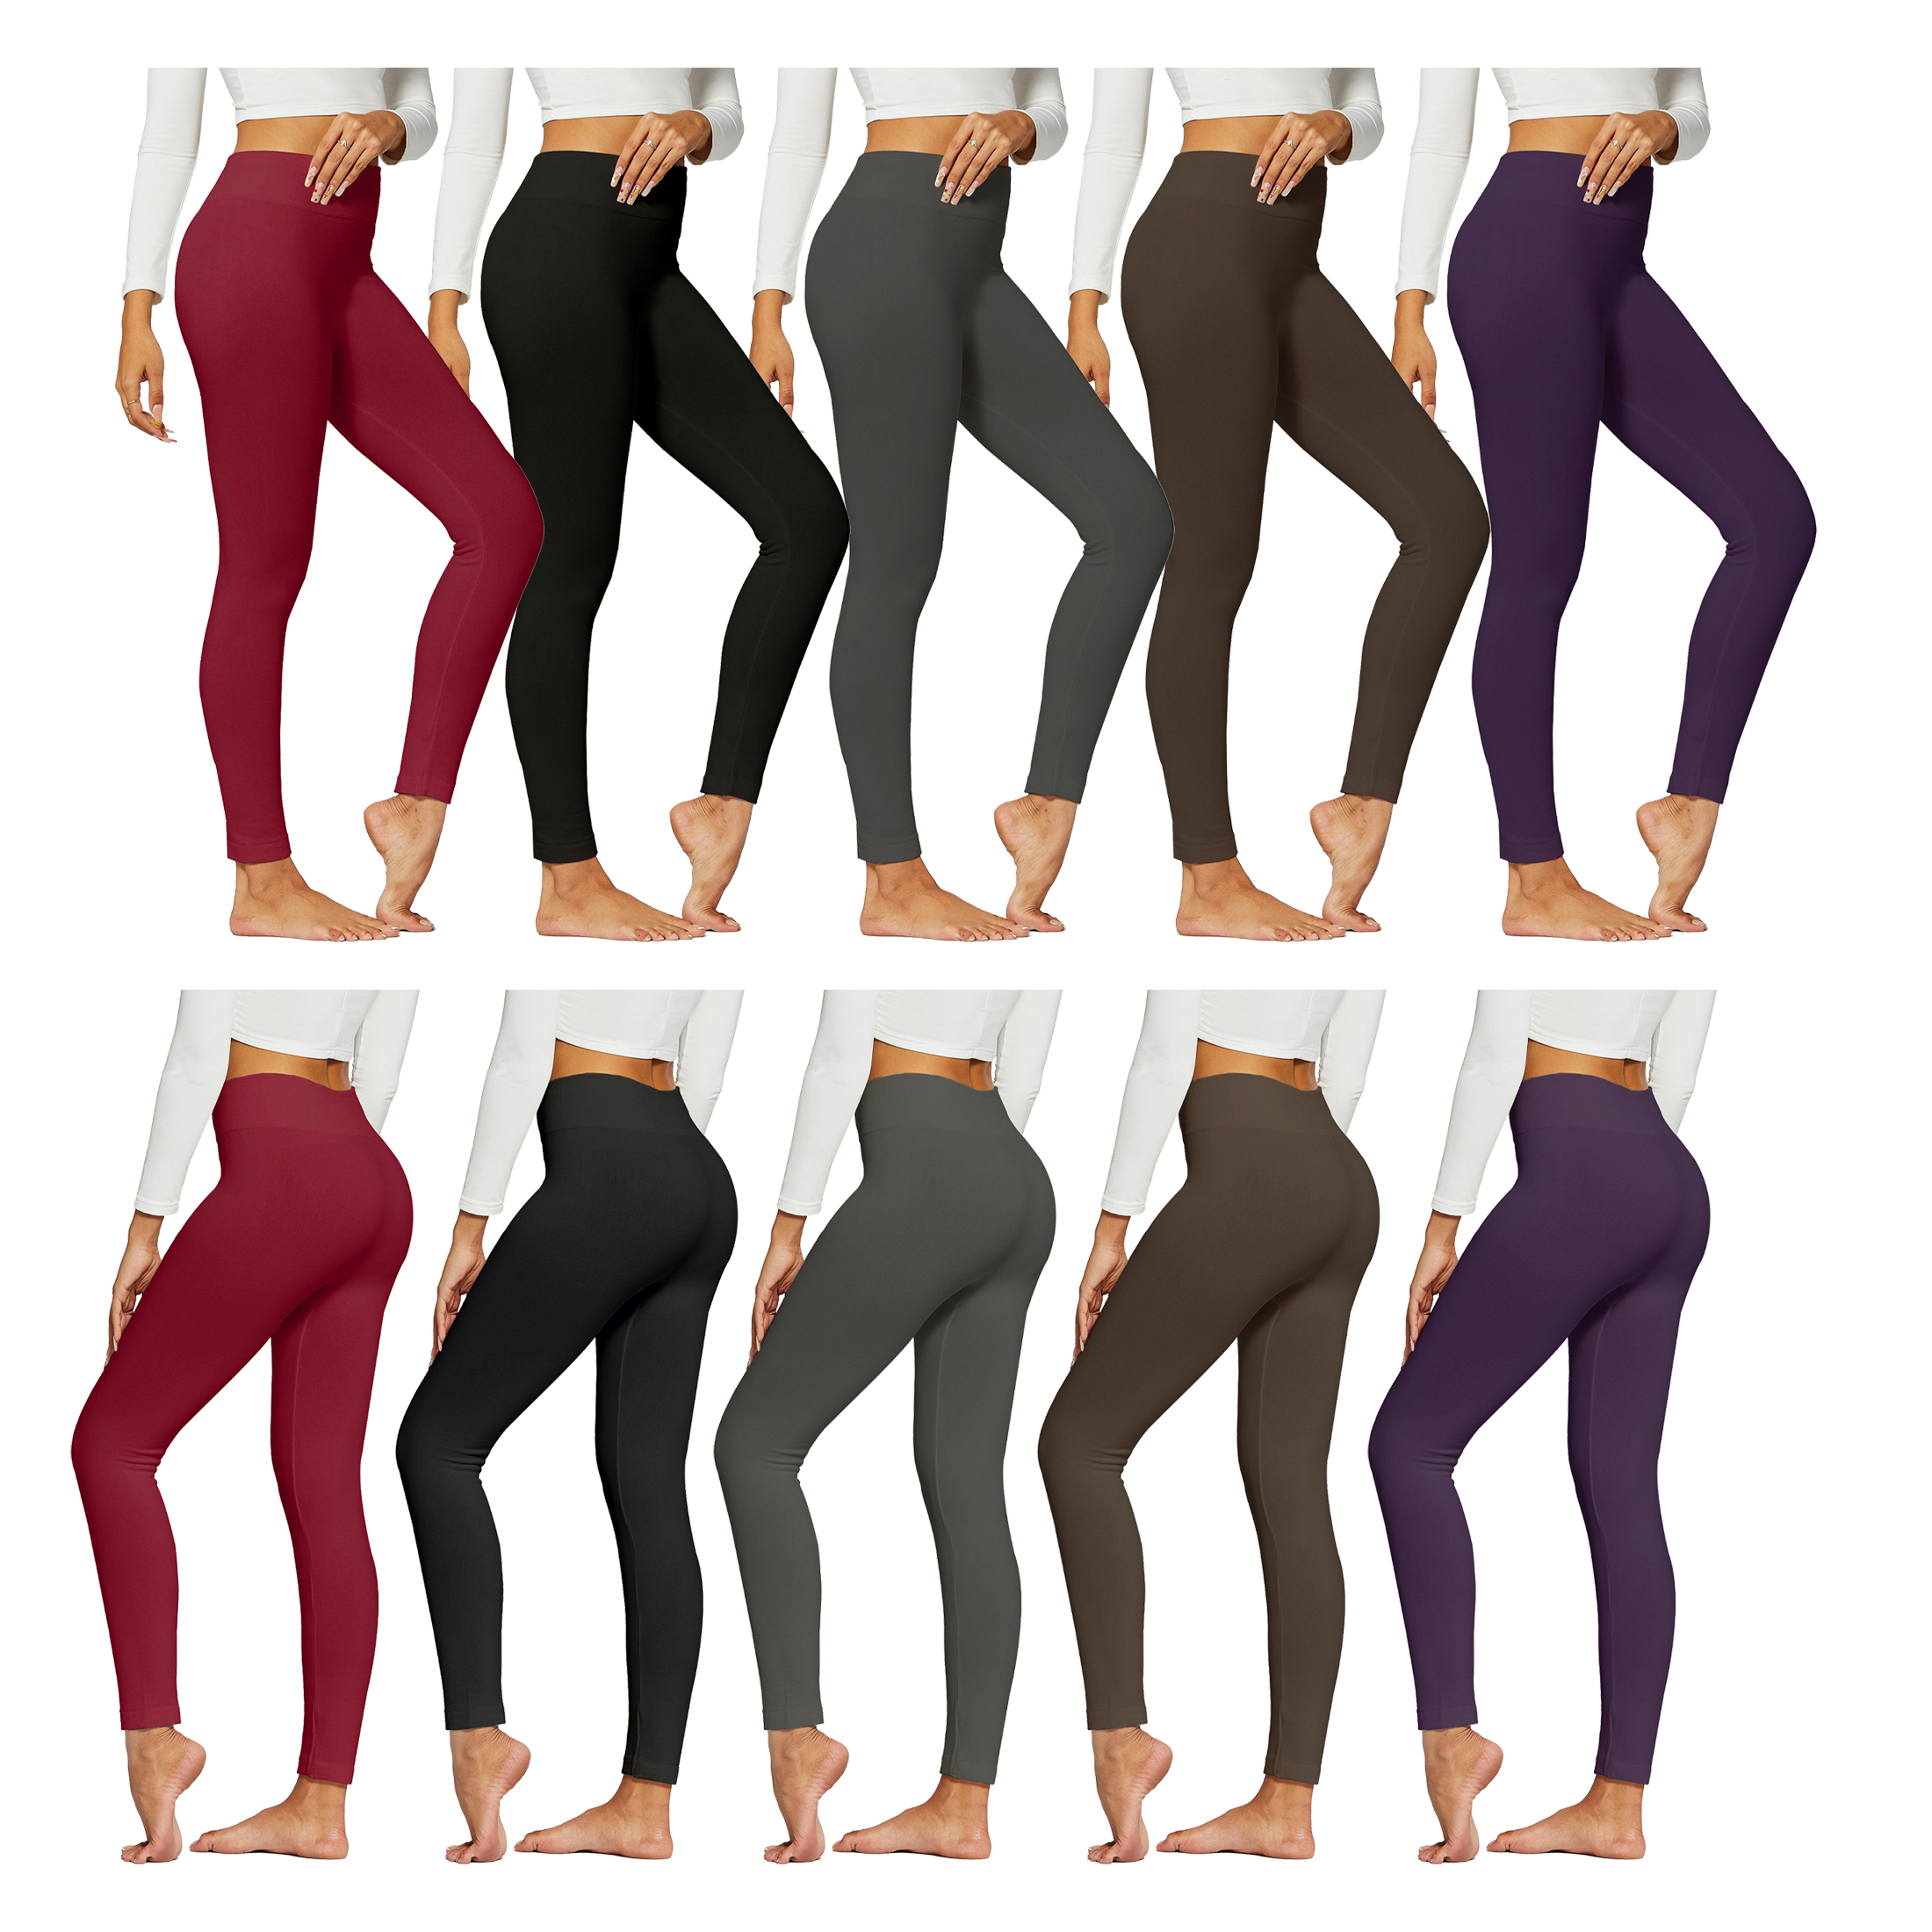 3-Pack:Women's Premium Quality High-Waist Fleece-Lined Leggings (Plus Size Available) - Black, Grey & Red, 3X/4X